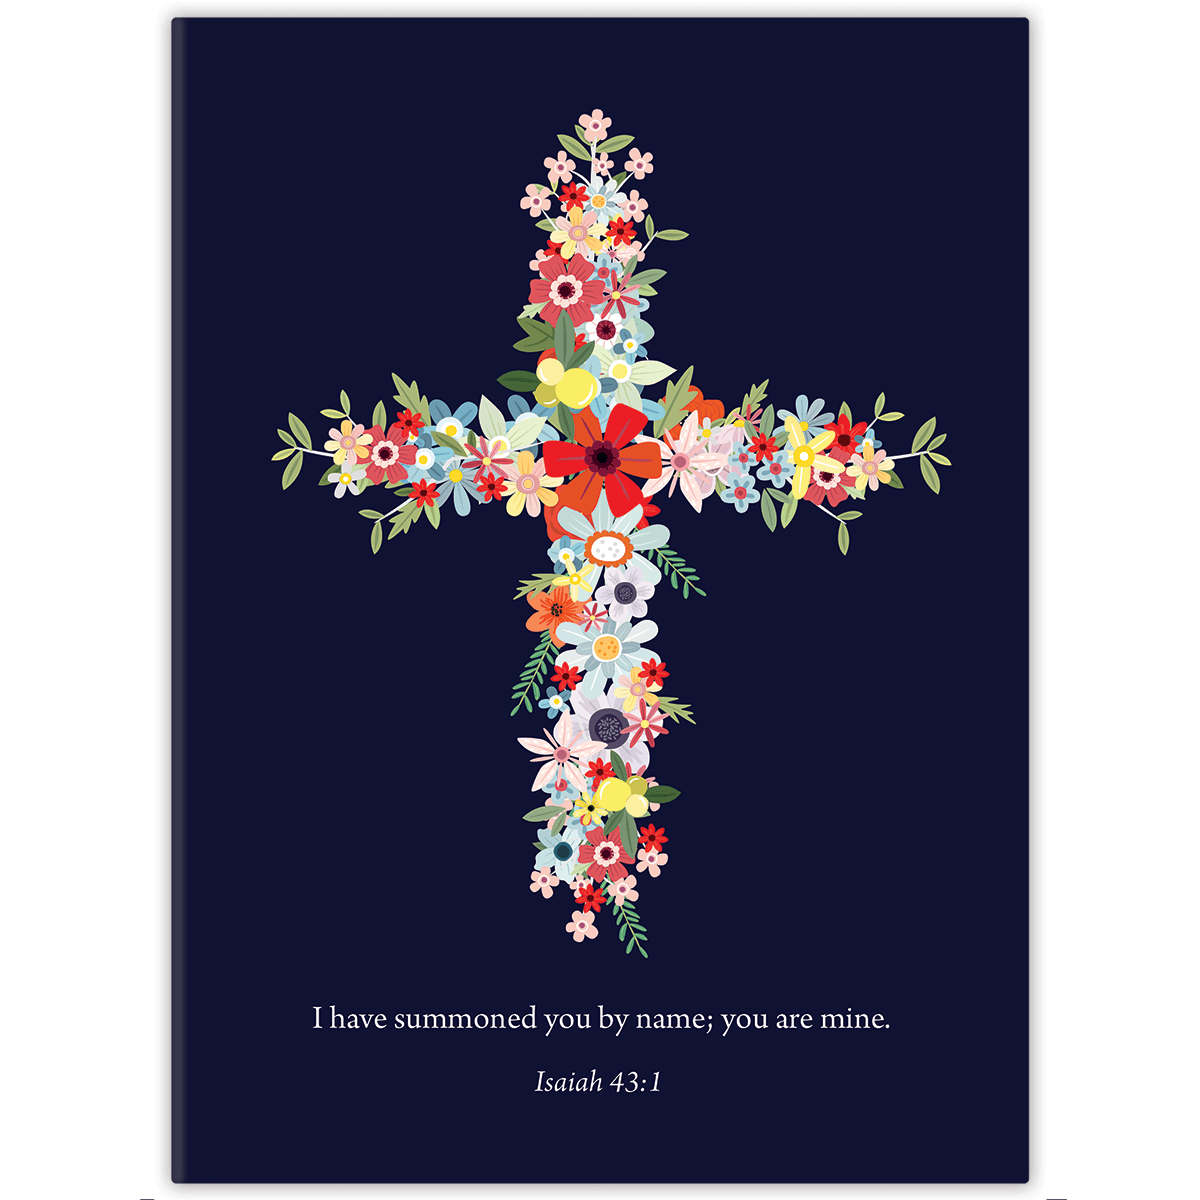 personalized devotional, personalized scripture planner, personalized scripture, personalized bible verse, christian gifts, christian gifts for women, christian planner 2022, christian mothers day gifts, christian wedding gifts, bible study gift, christian planners, floral cross, sunday devotional, bible planners